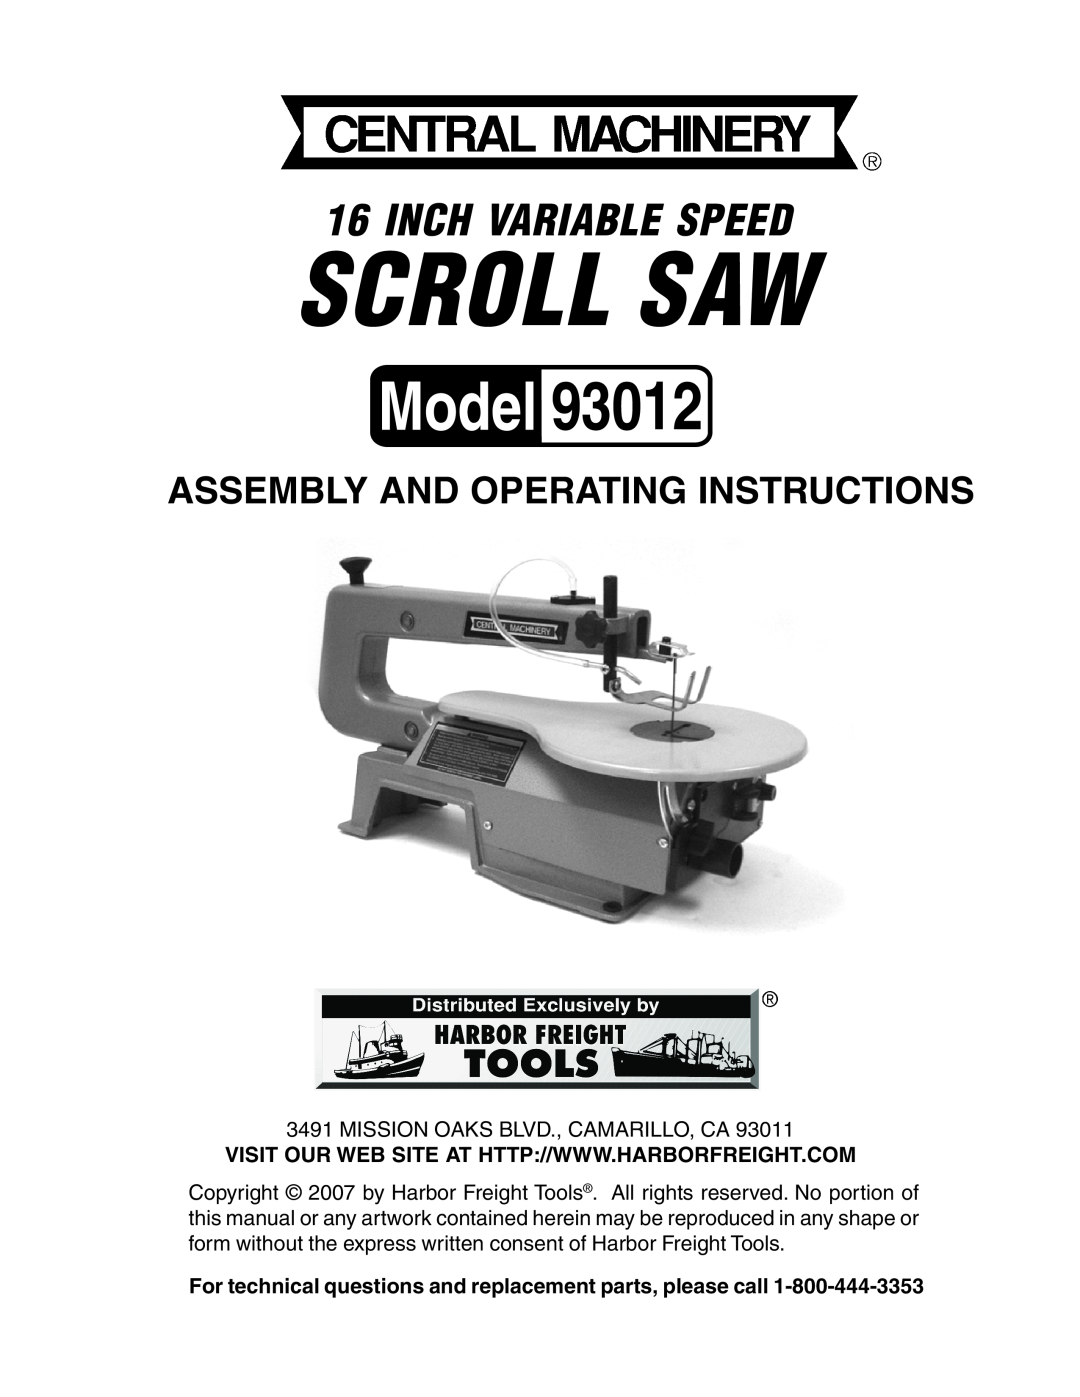 Harbor Freight Tools 93012 operating instructions Scroll Saw, Inch Variable Speed, Assembly And Operating Instructions 